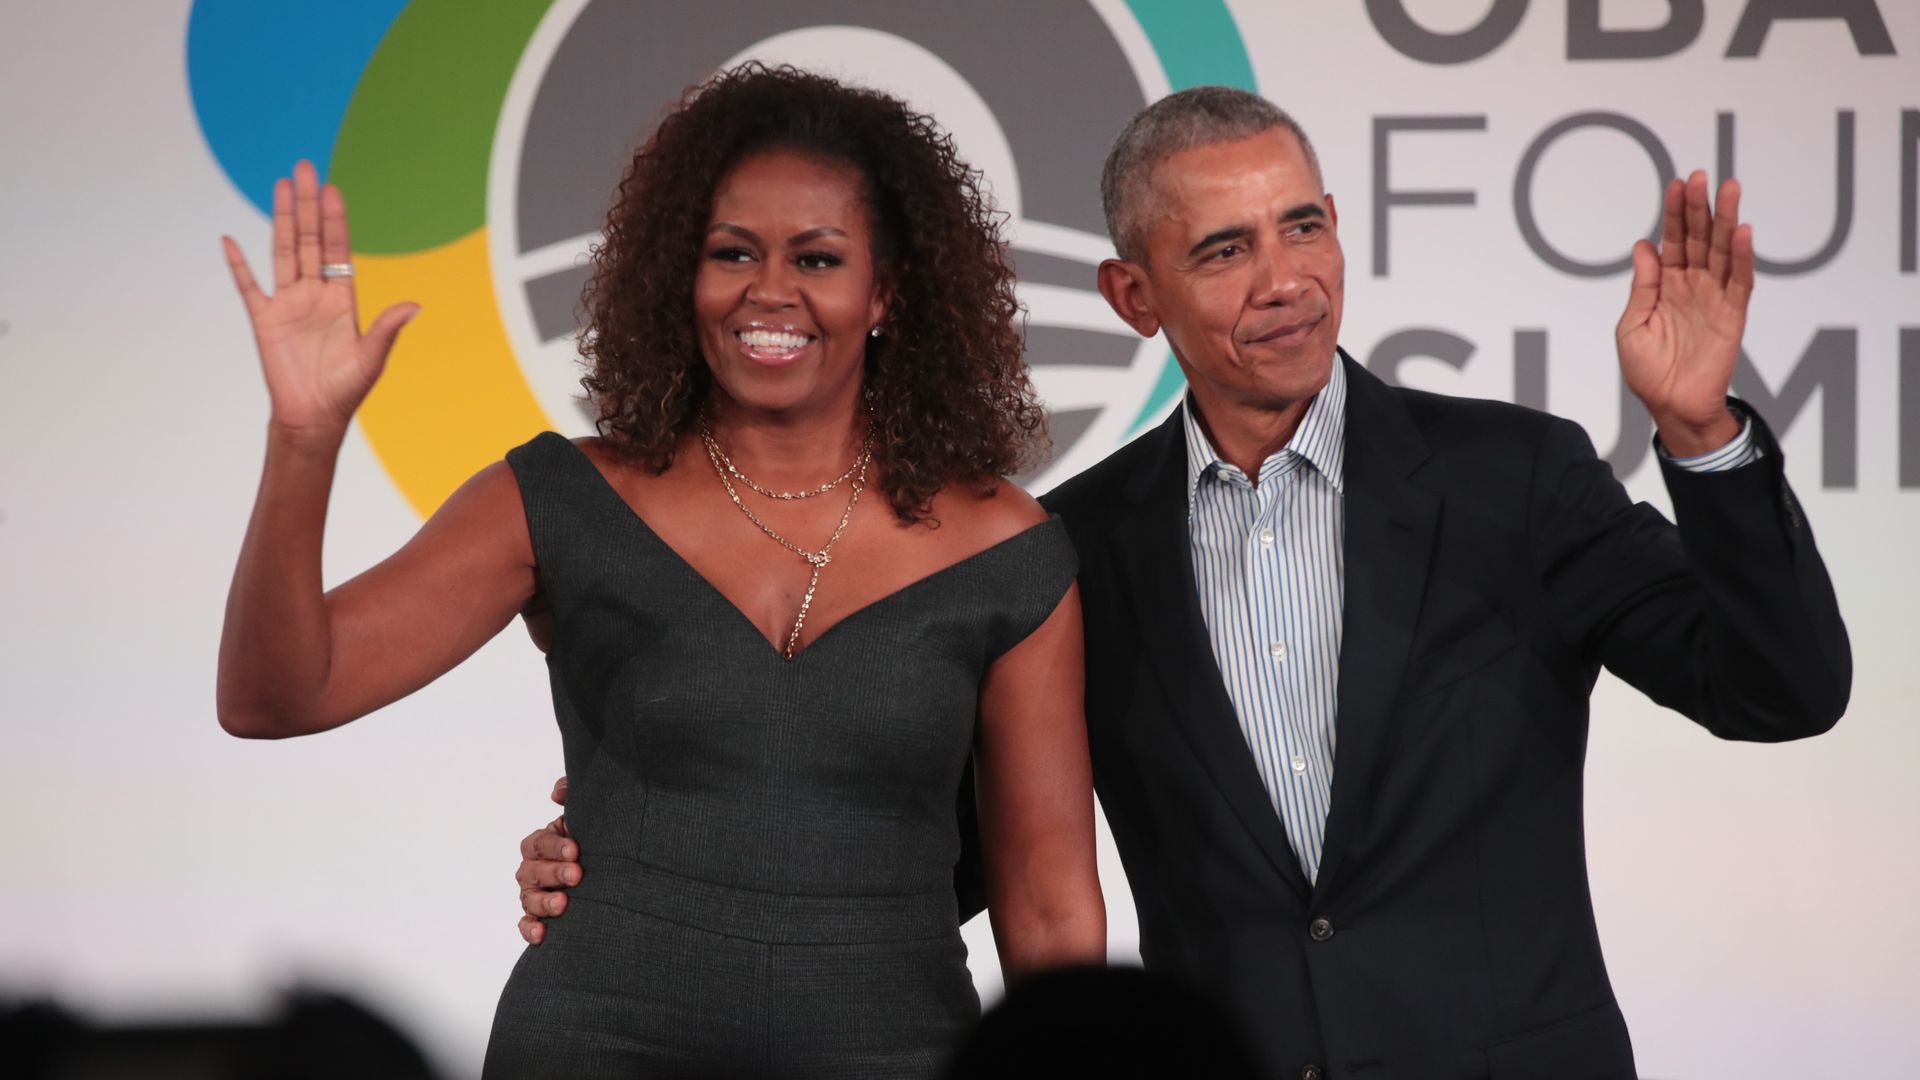 Former U.S. President Barack Obama and his wife Michelle close the Obama Foundation Summit together on the campus of the Illinois Institute of Technology on October 29, 2019 in Chicago